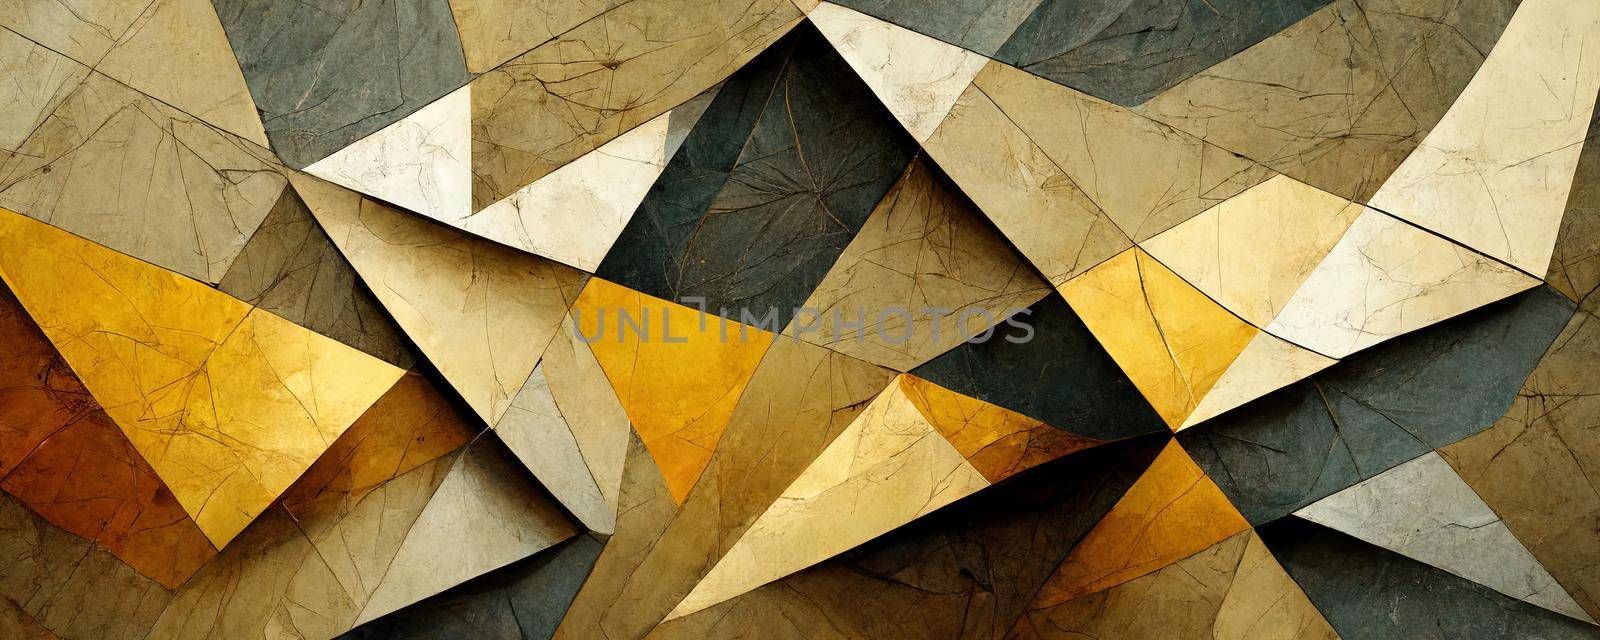 Lux conceptual texture from golden polygons by TRMK